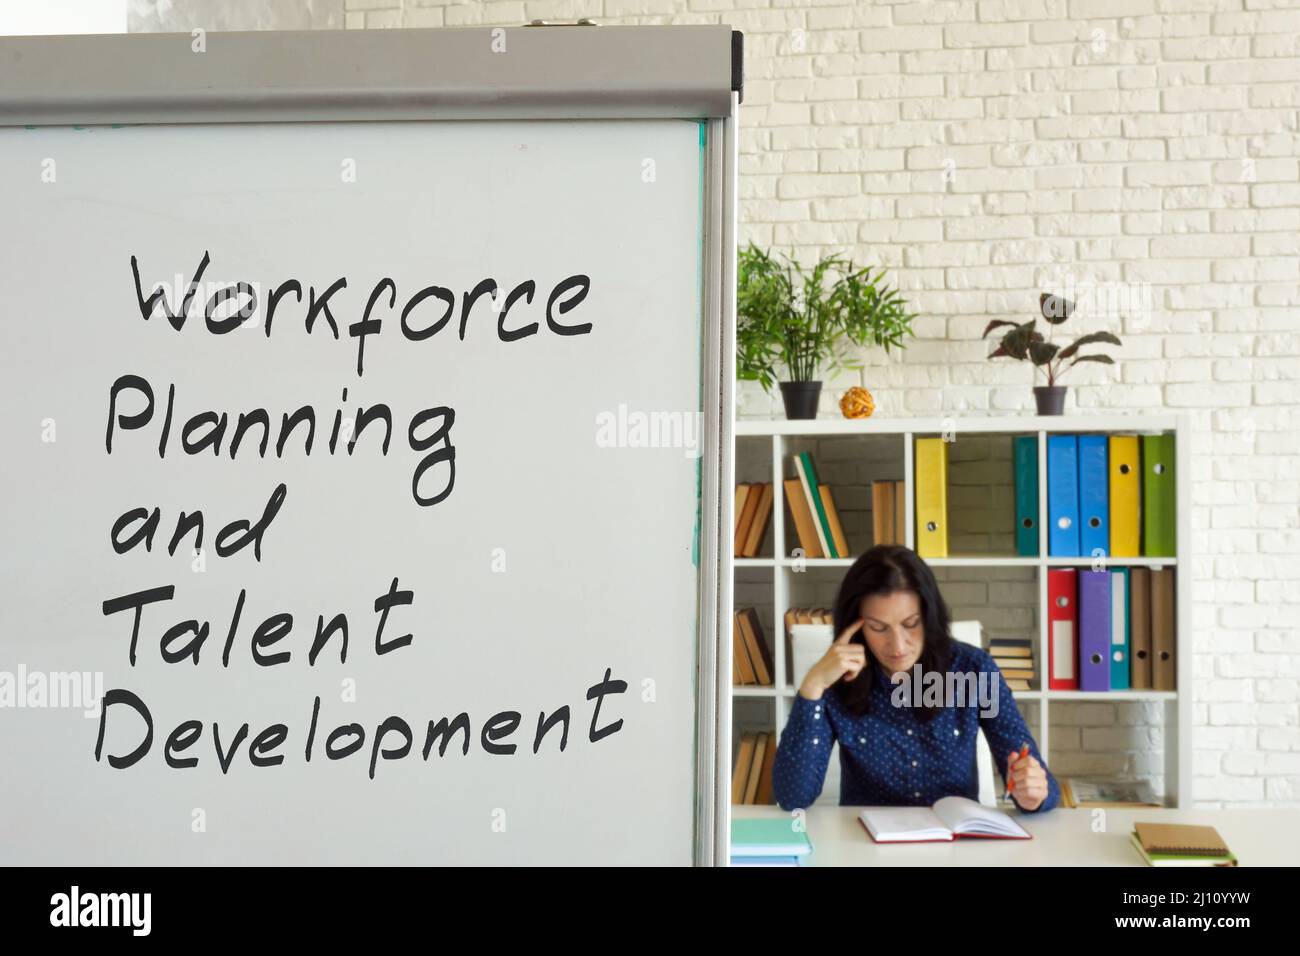 Workforce planning and talent development written on the whiteboard. Stock Photo